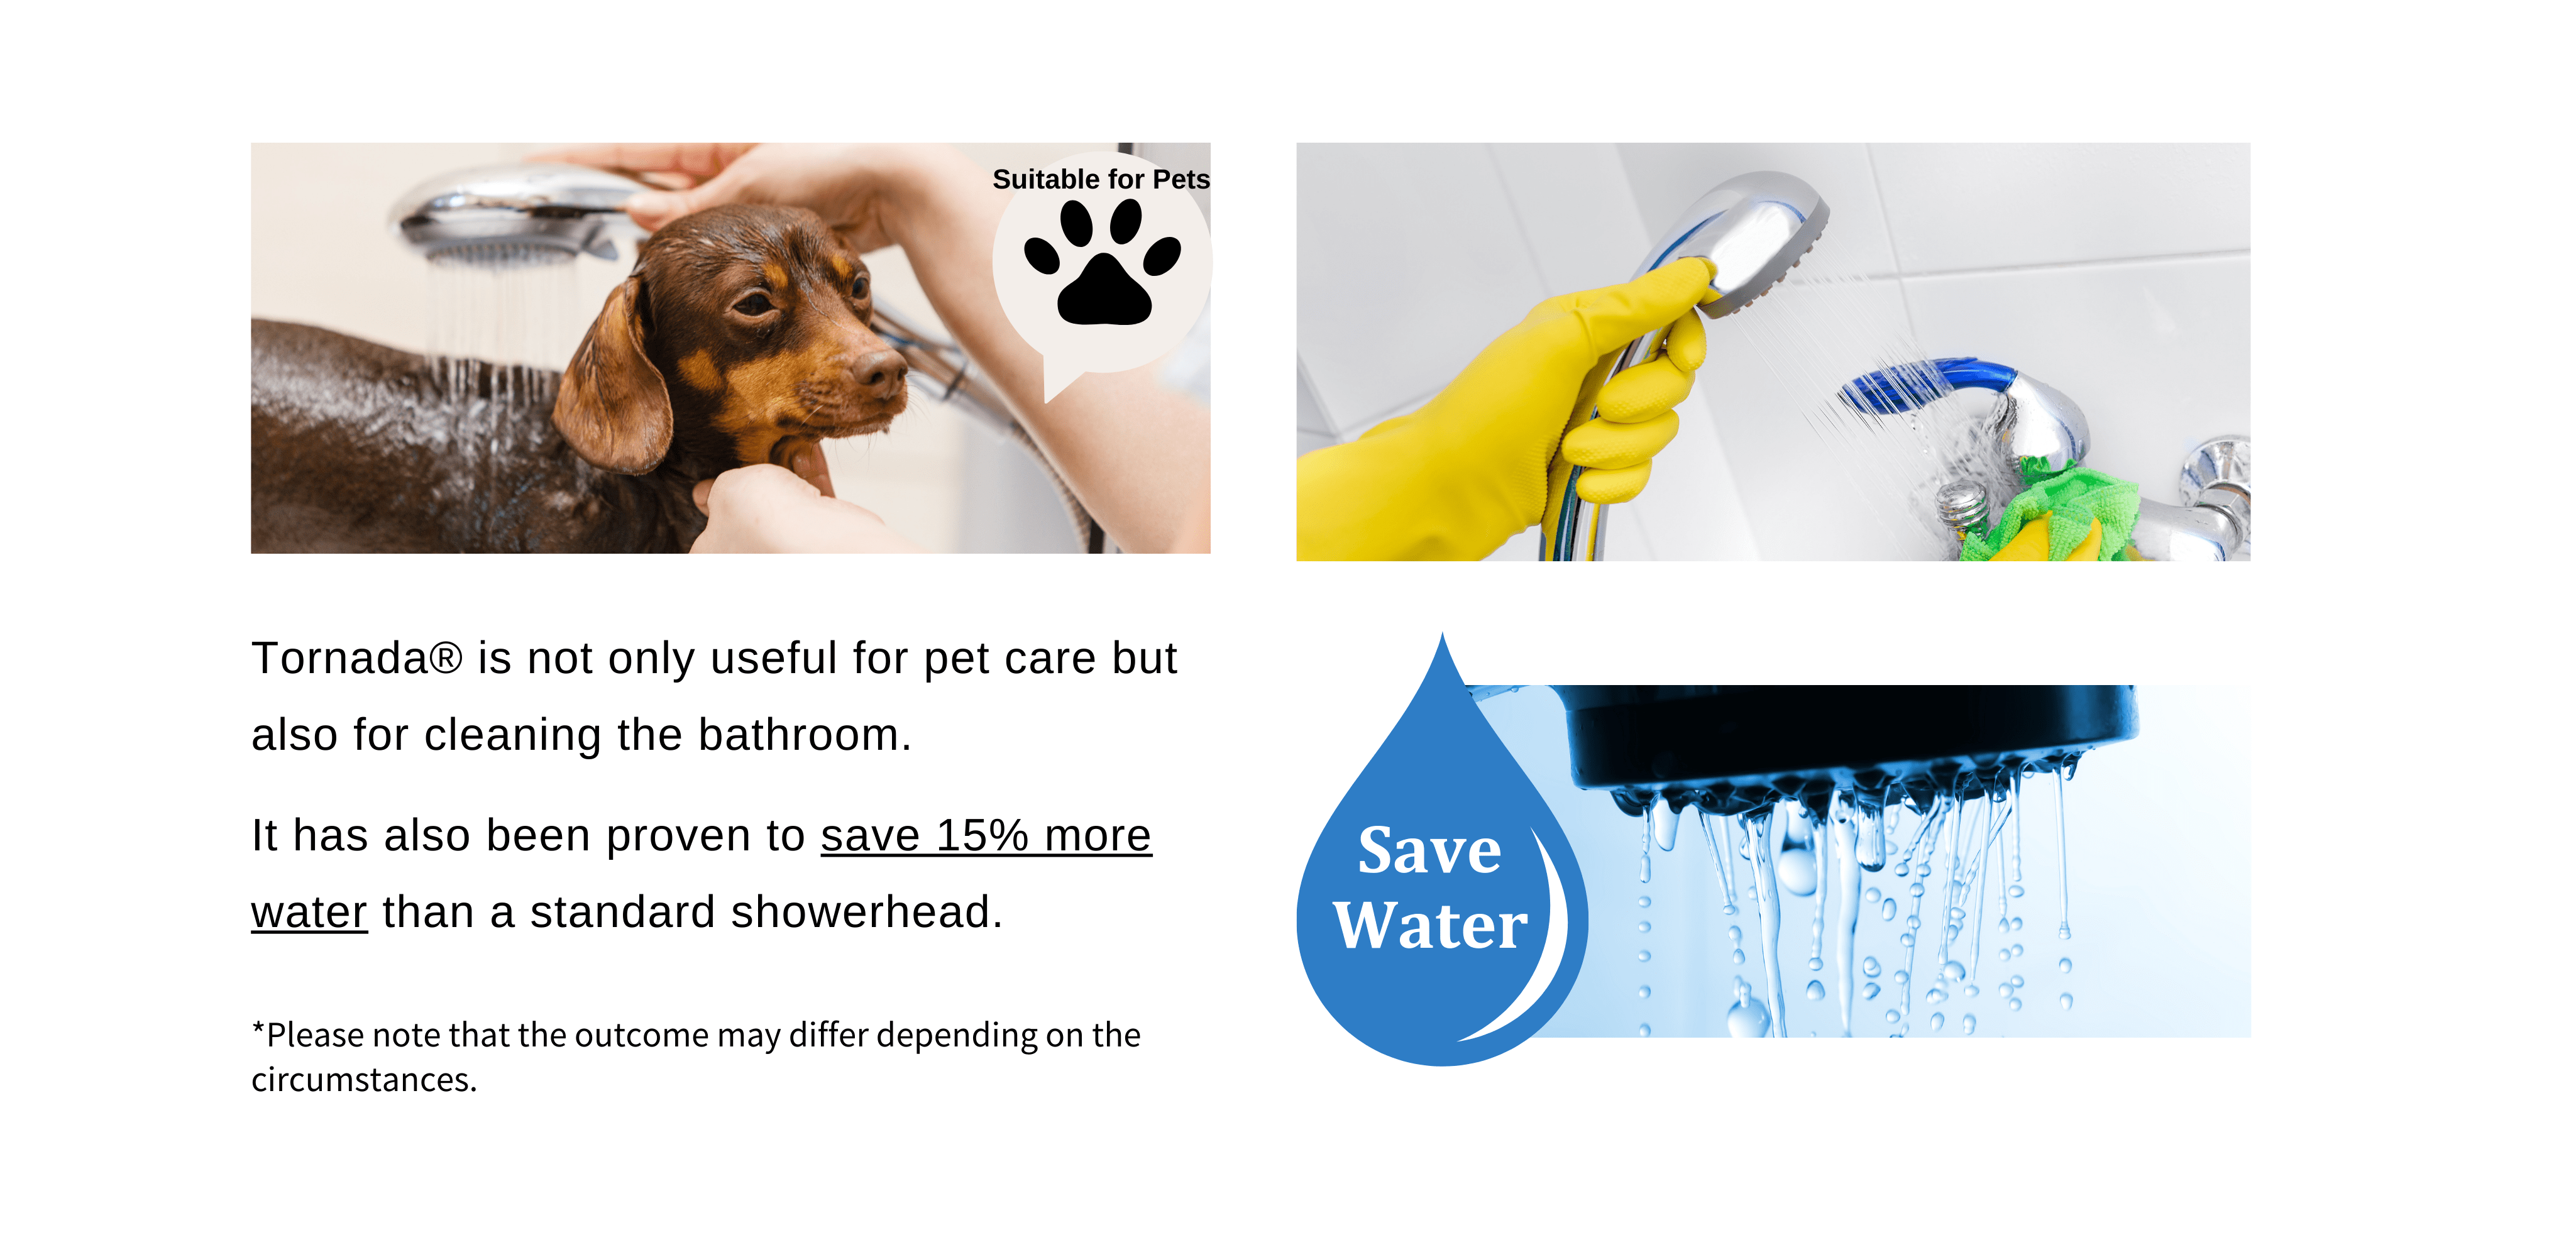 Also effective for pet care and bathroom cleaning. Saves 15% more water than a standard showerhead.